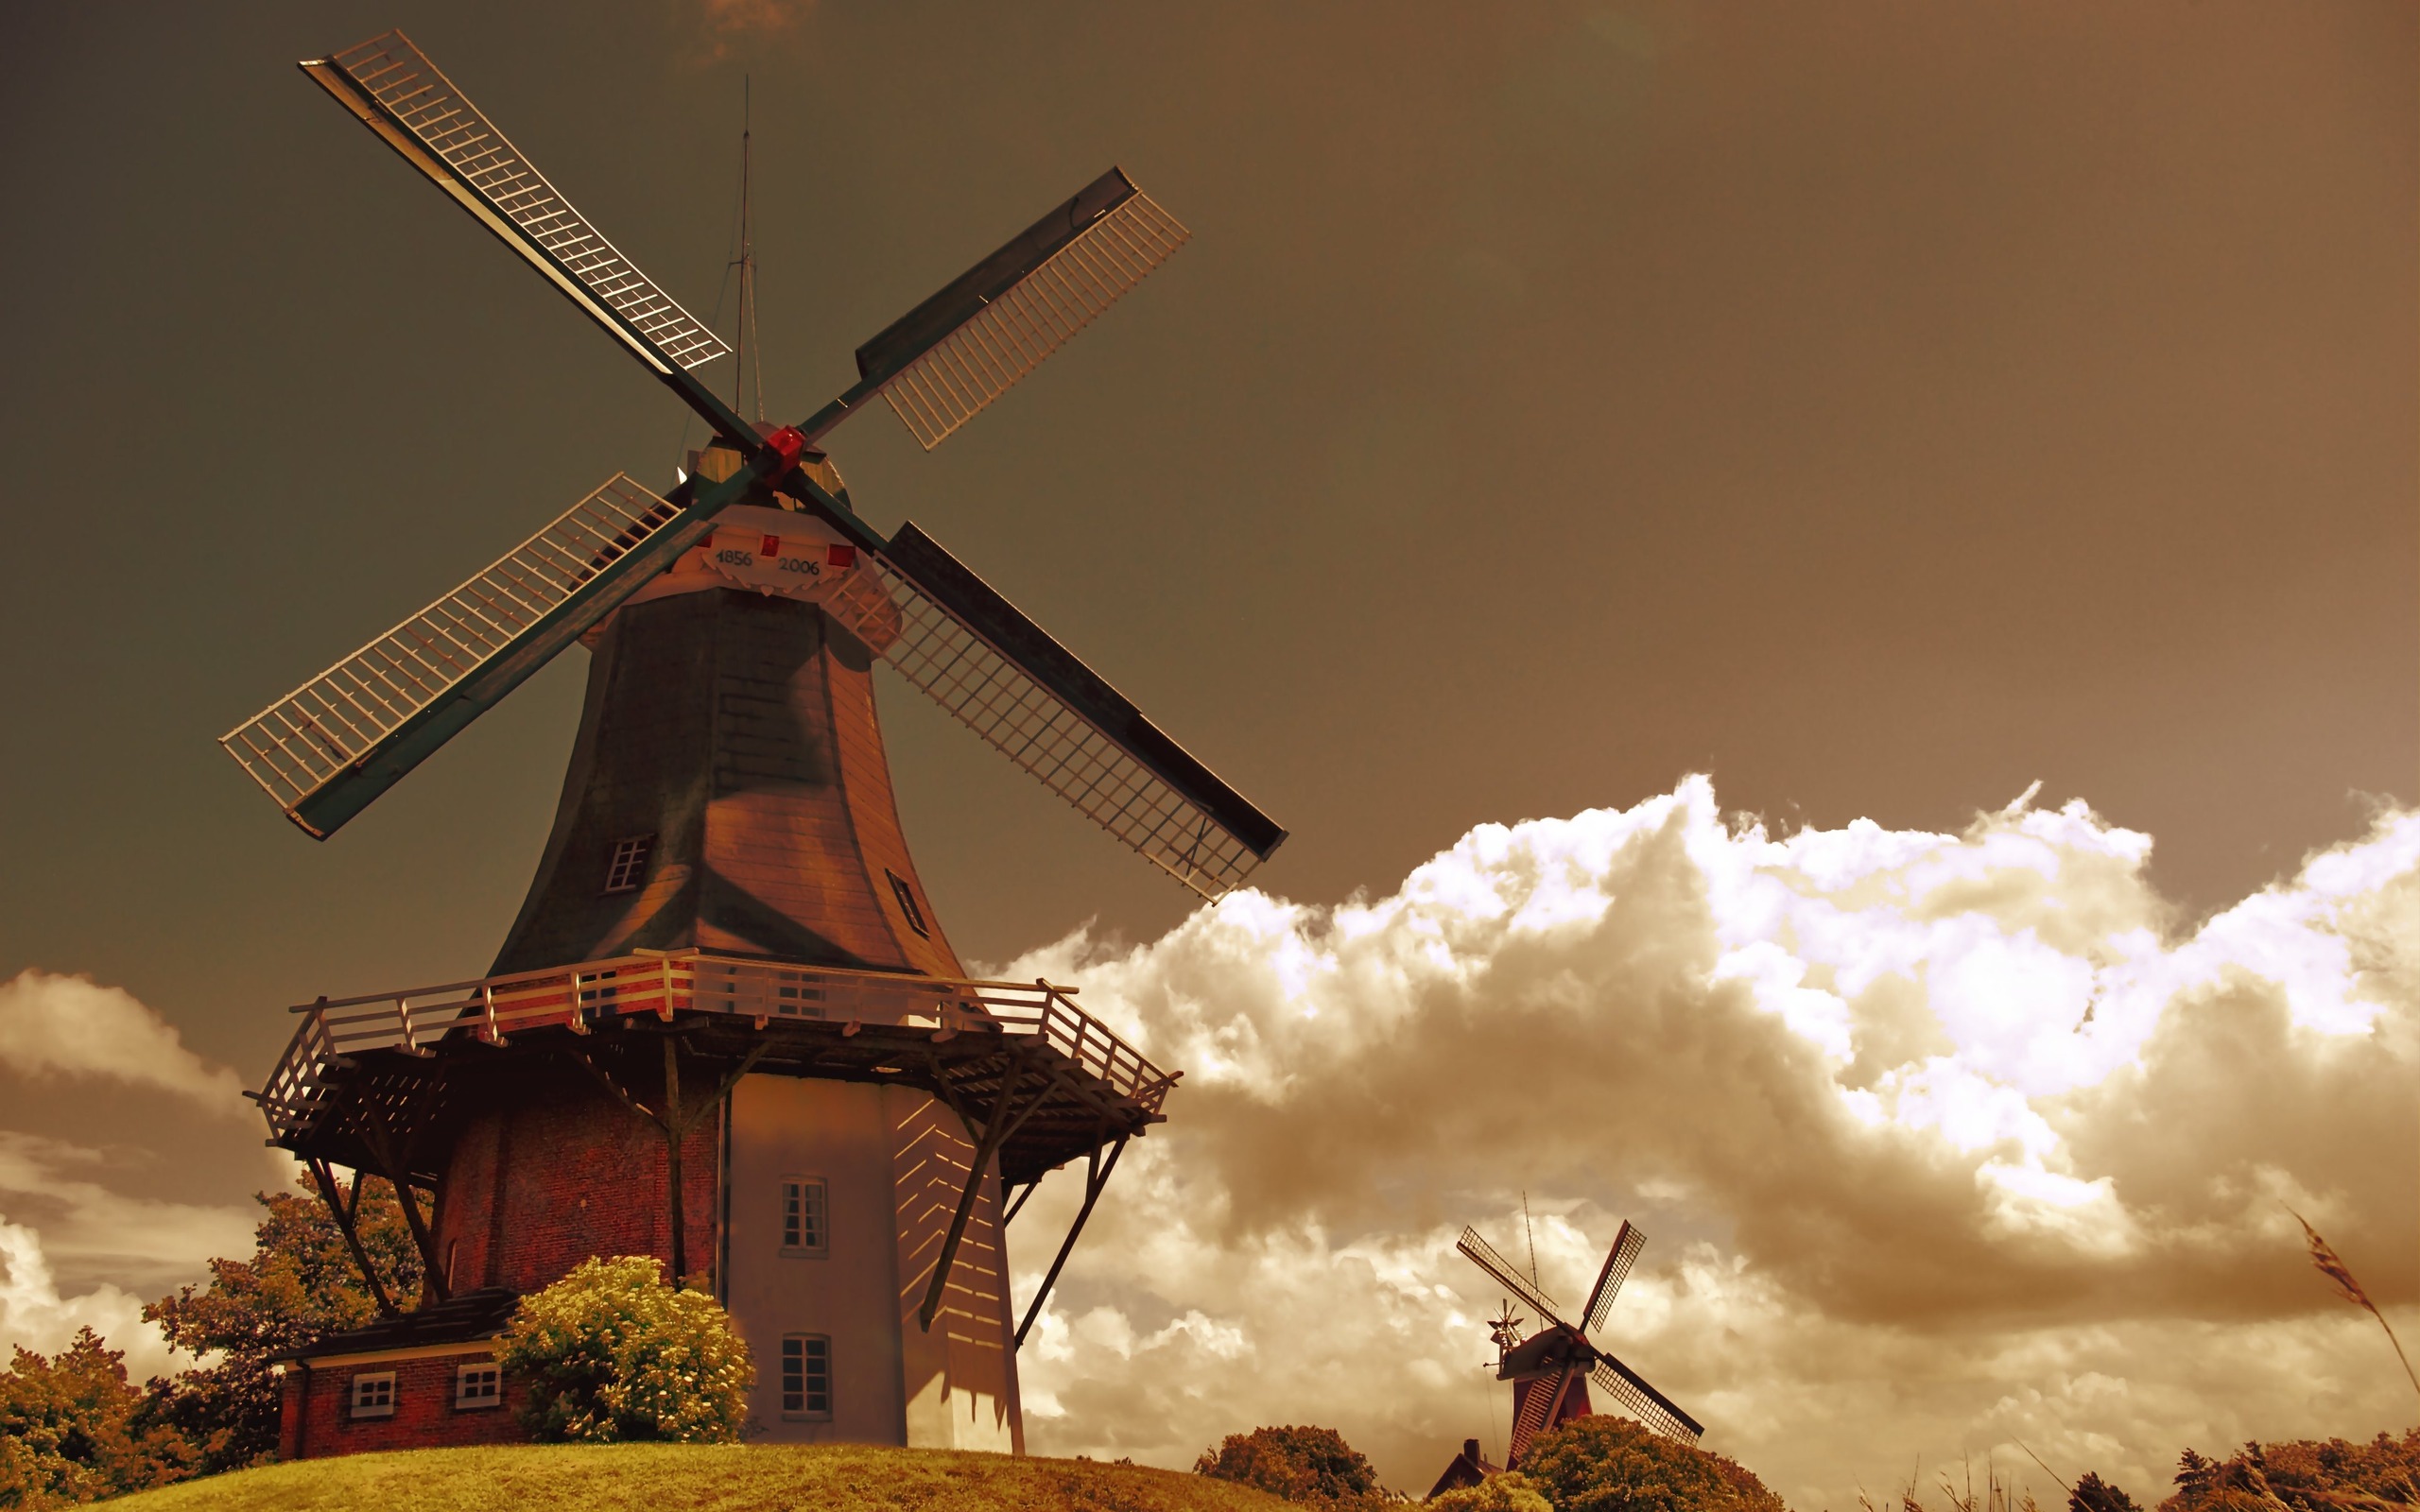 Download background man made, windmill